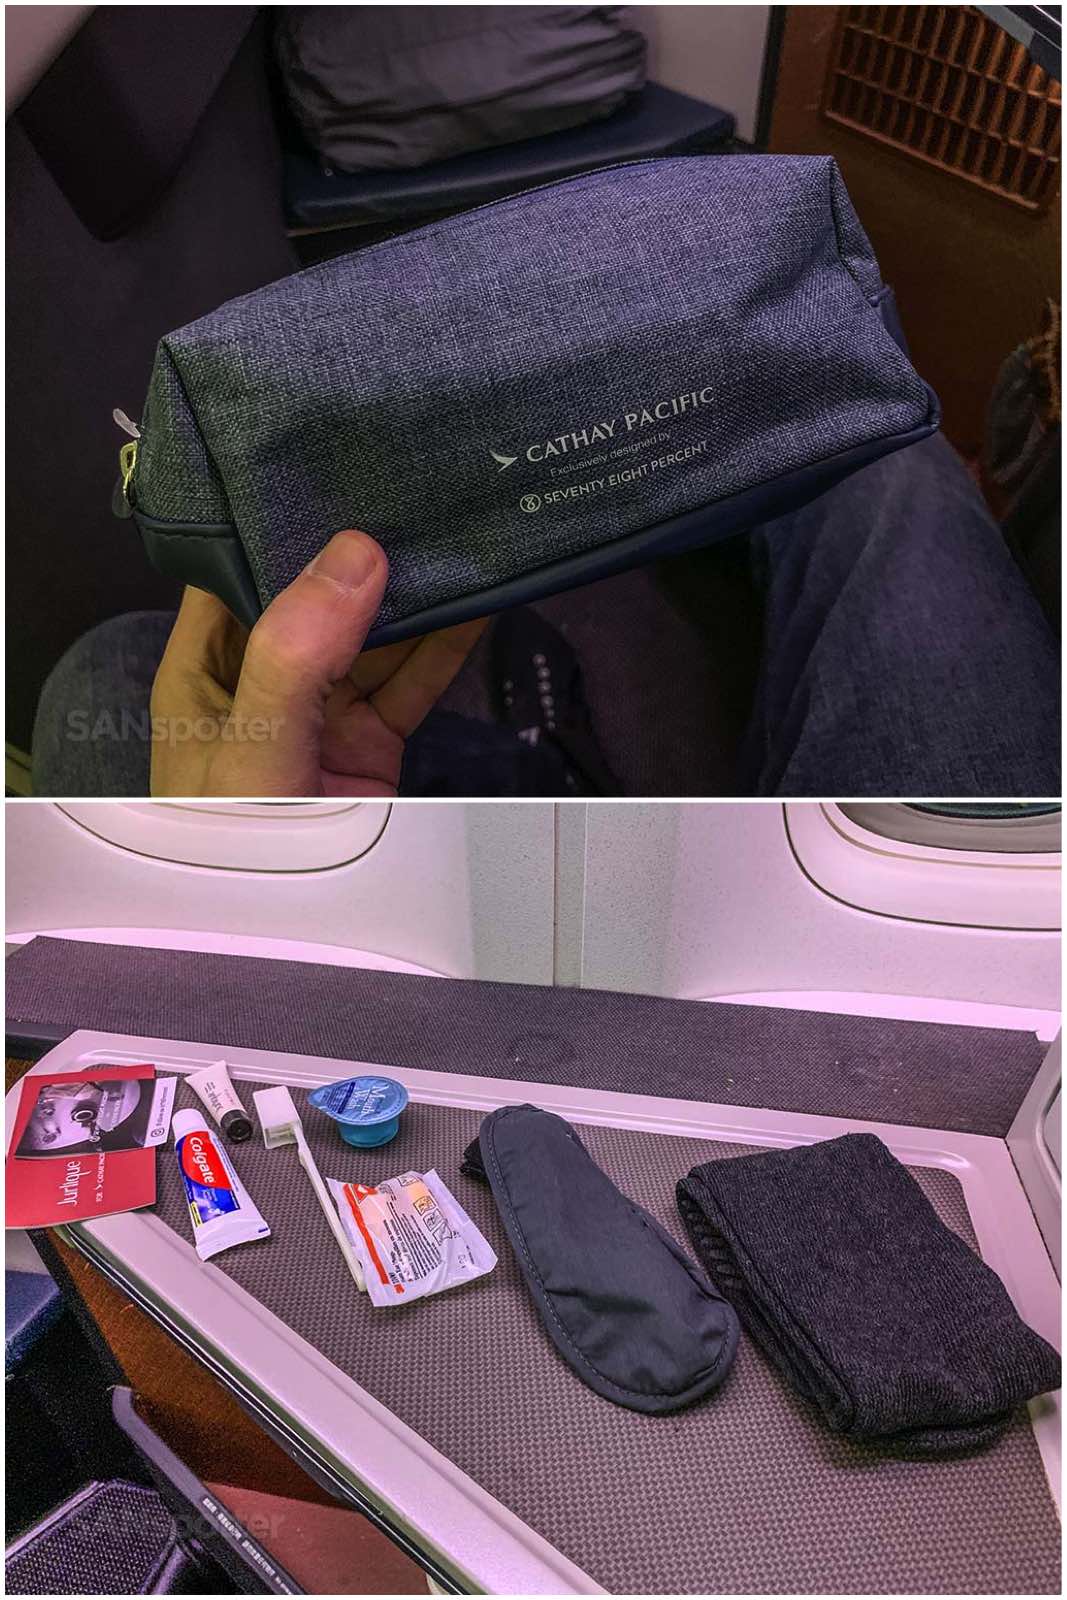 Cathay Pacific business class amenity kit